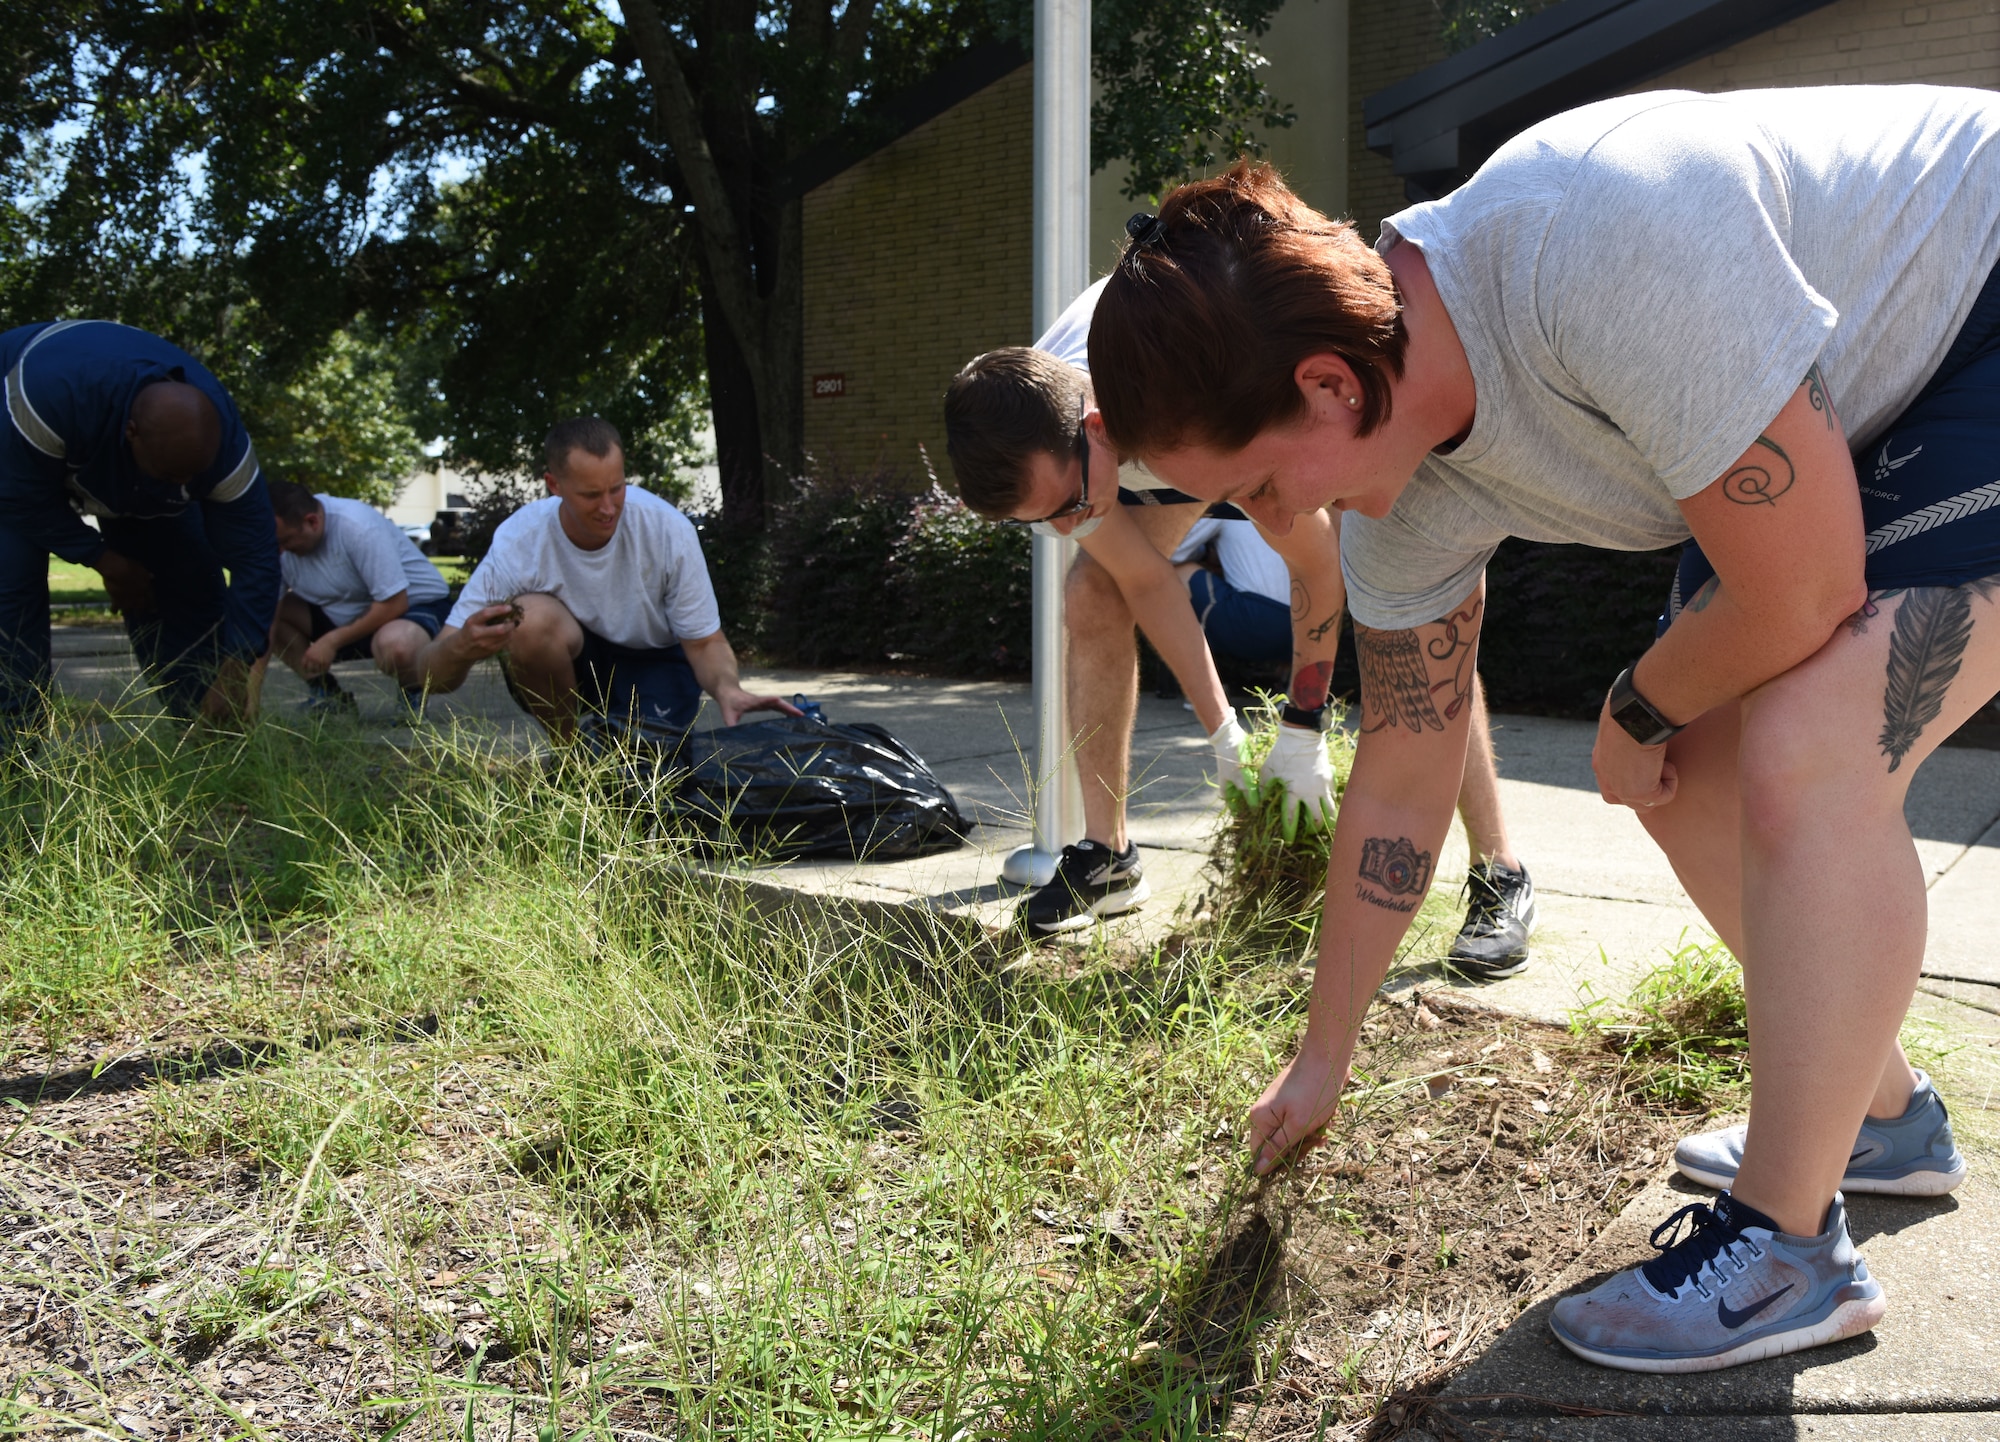 Mathies NCO Academy Airmen provide grounds maintenance around the academy at Keesler Air Force Base, Mississippi, Sept. 18, 2018. In order to assist base operations support, Keesler Airmen will provide grounds maintenance around their work area. (U.S. Air Force photo by Kemberly Groue)